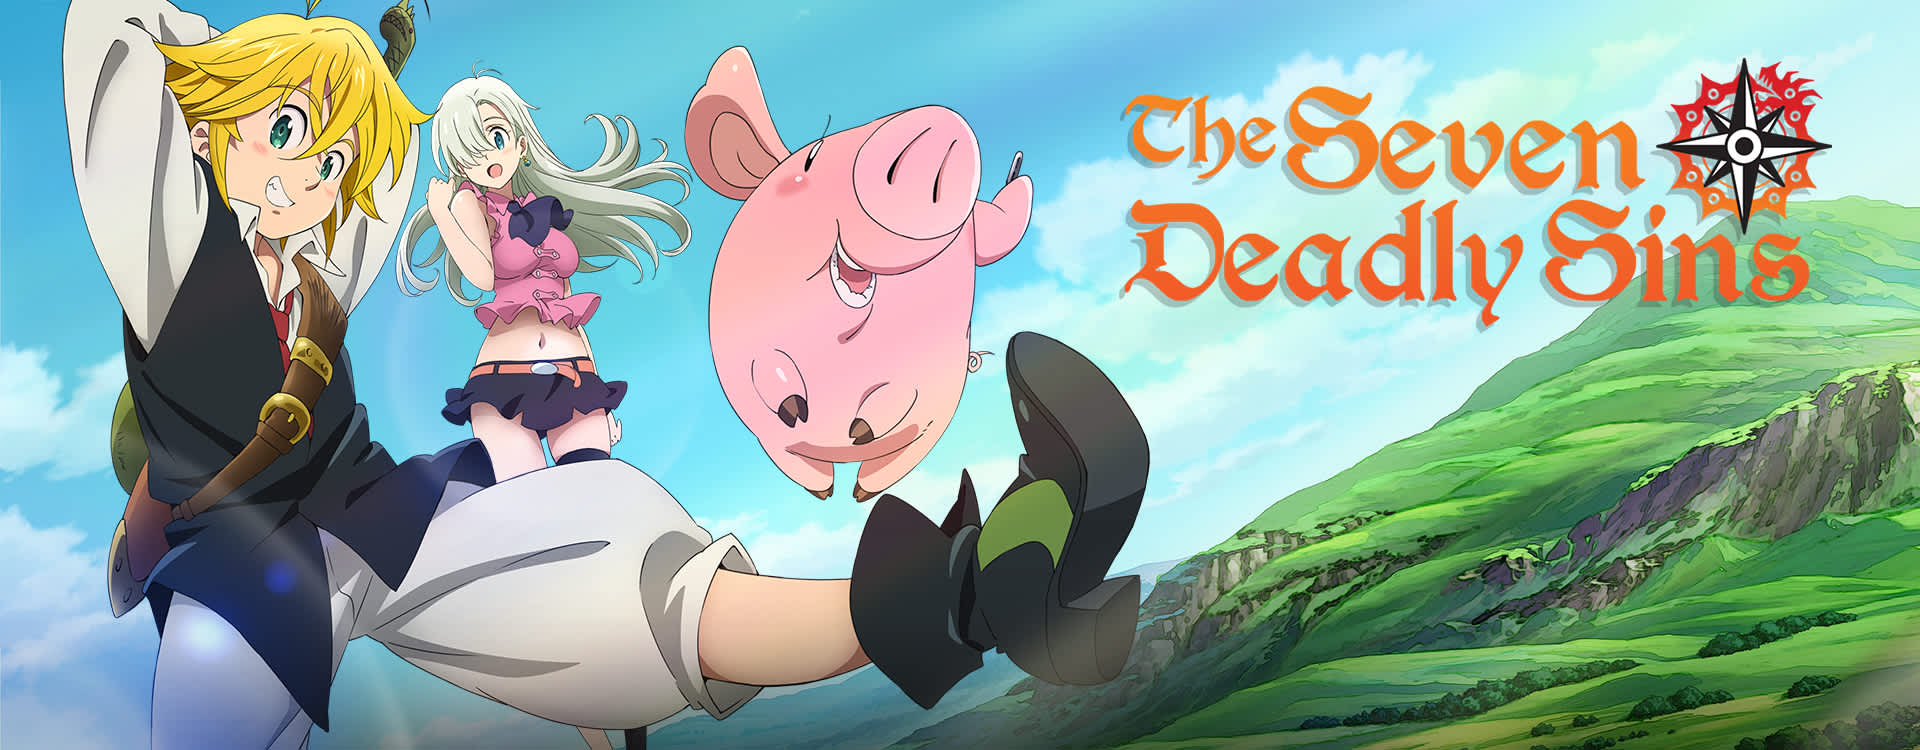 Watch The Seven Deadly Sins Sub Dub Action Adventure Fantasy